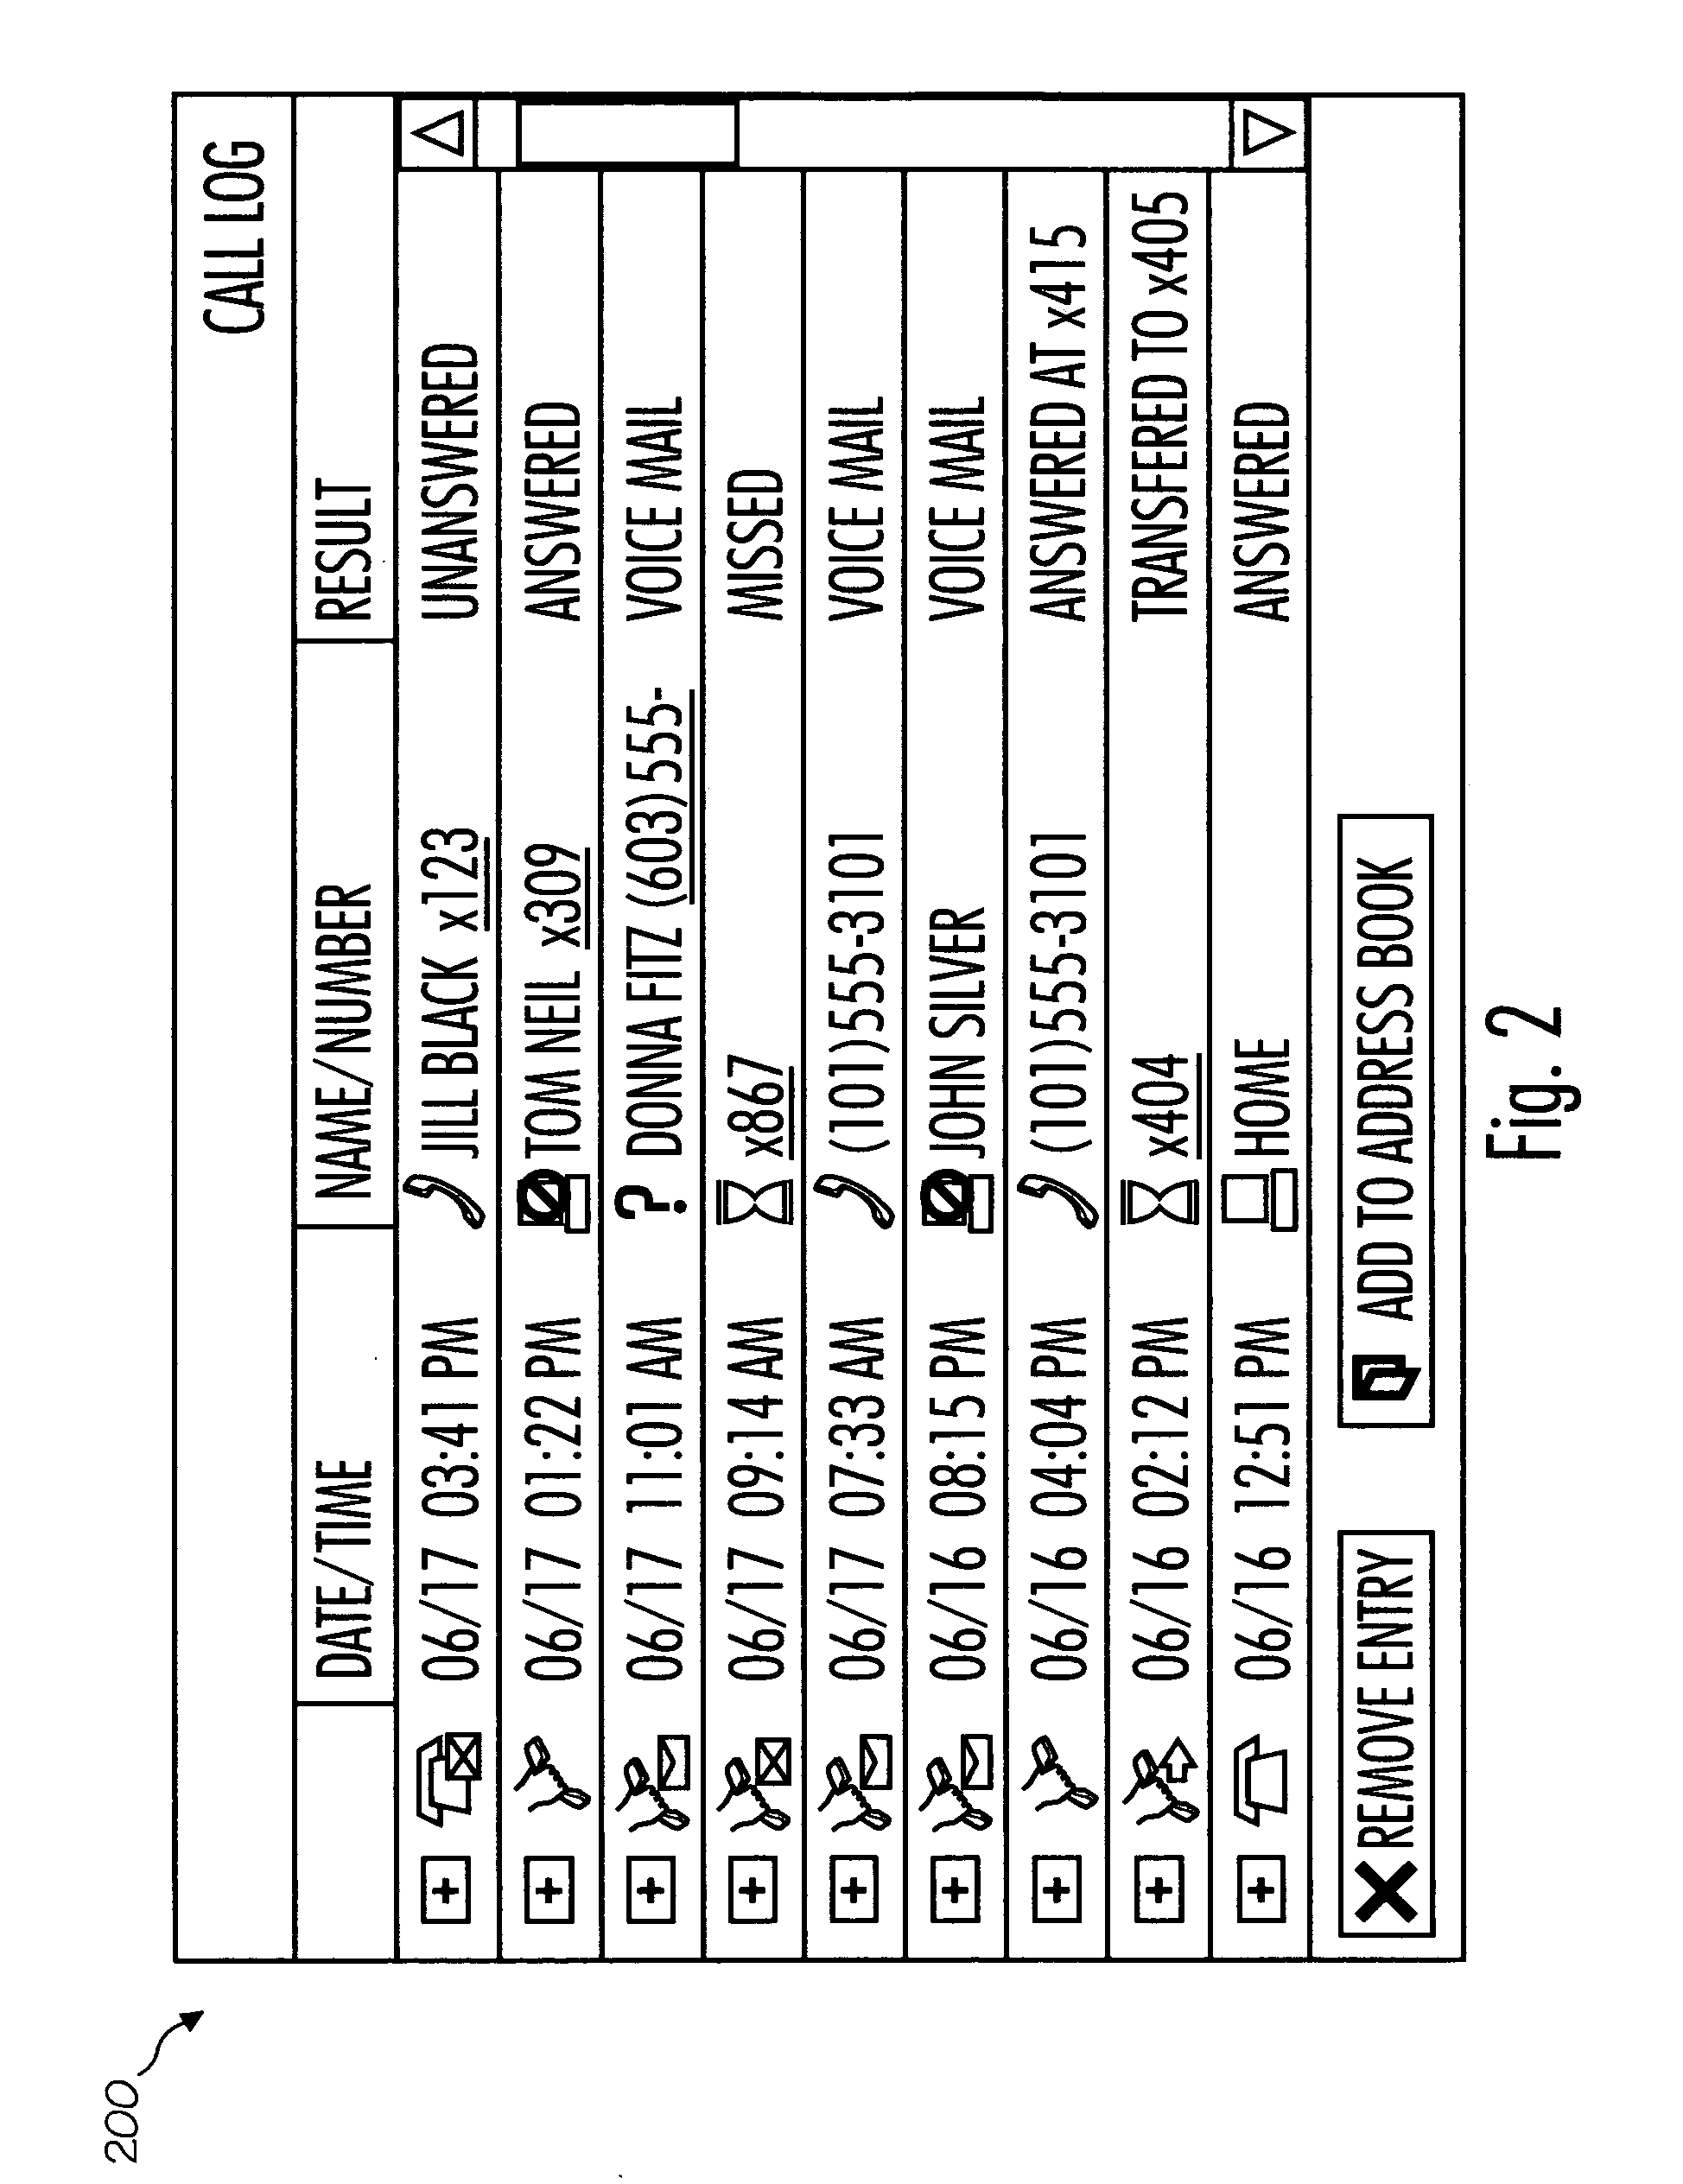 System and method for real-time call log status